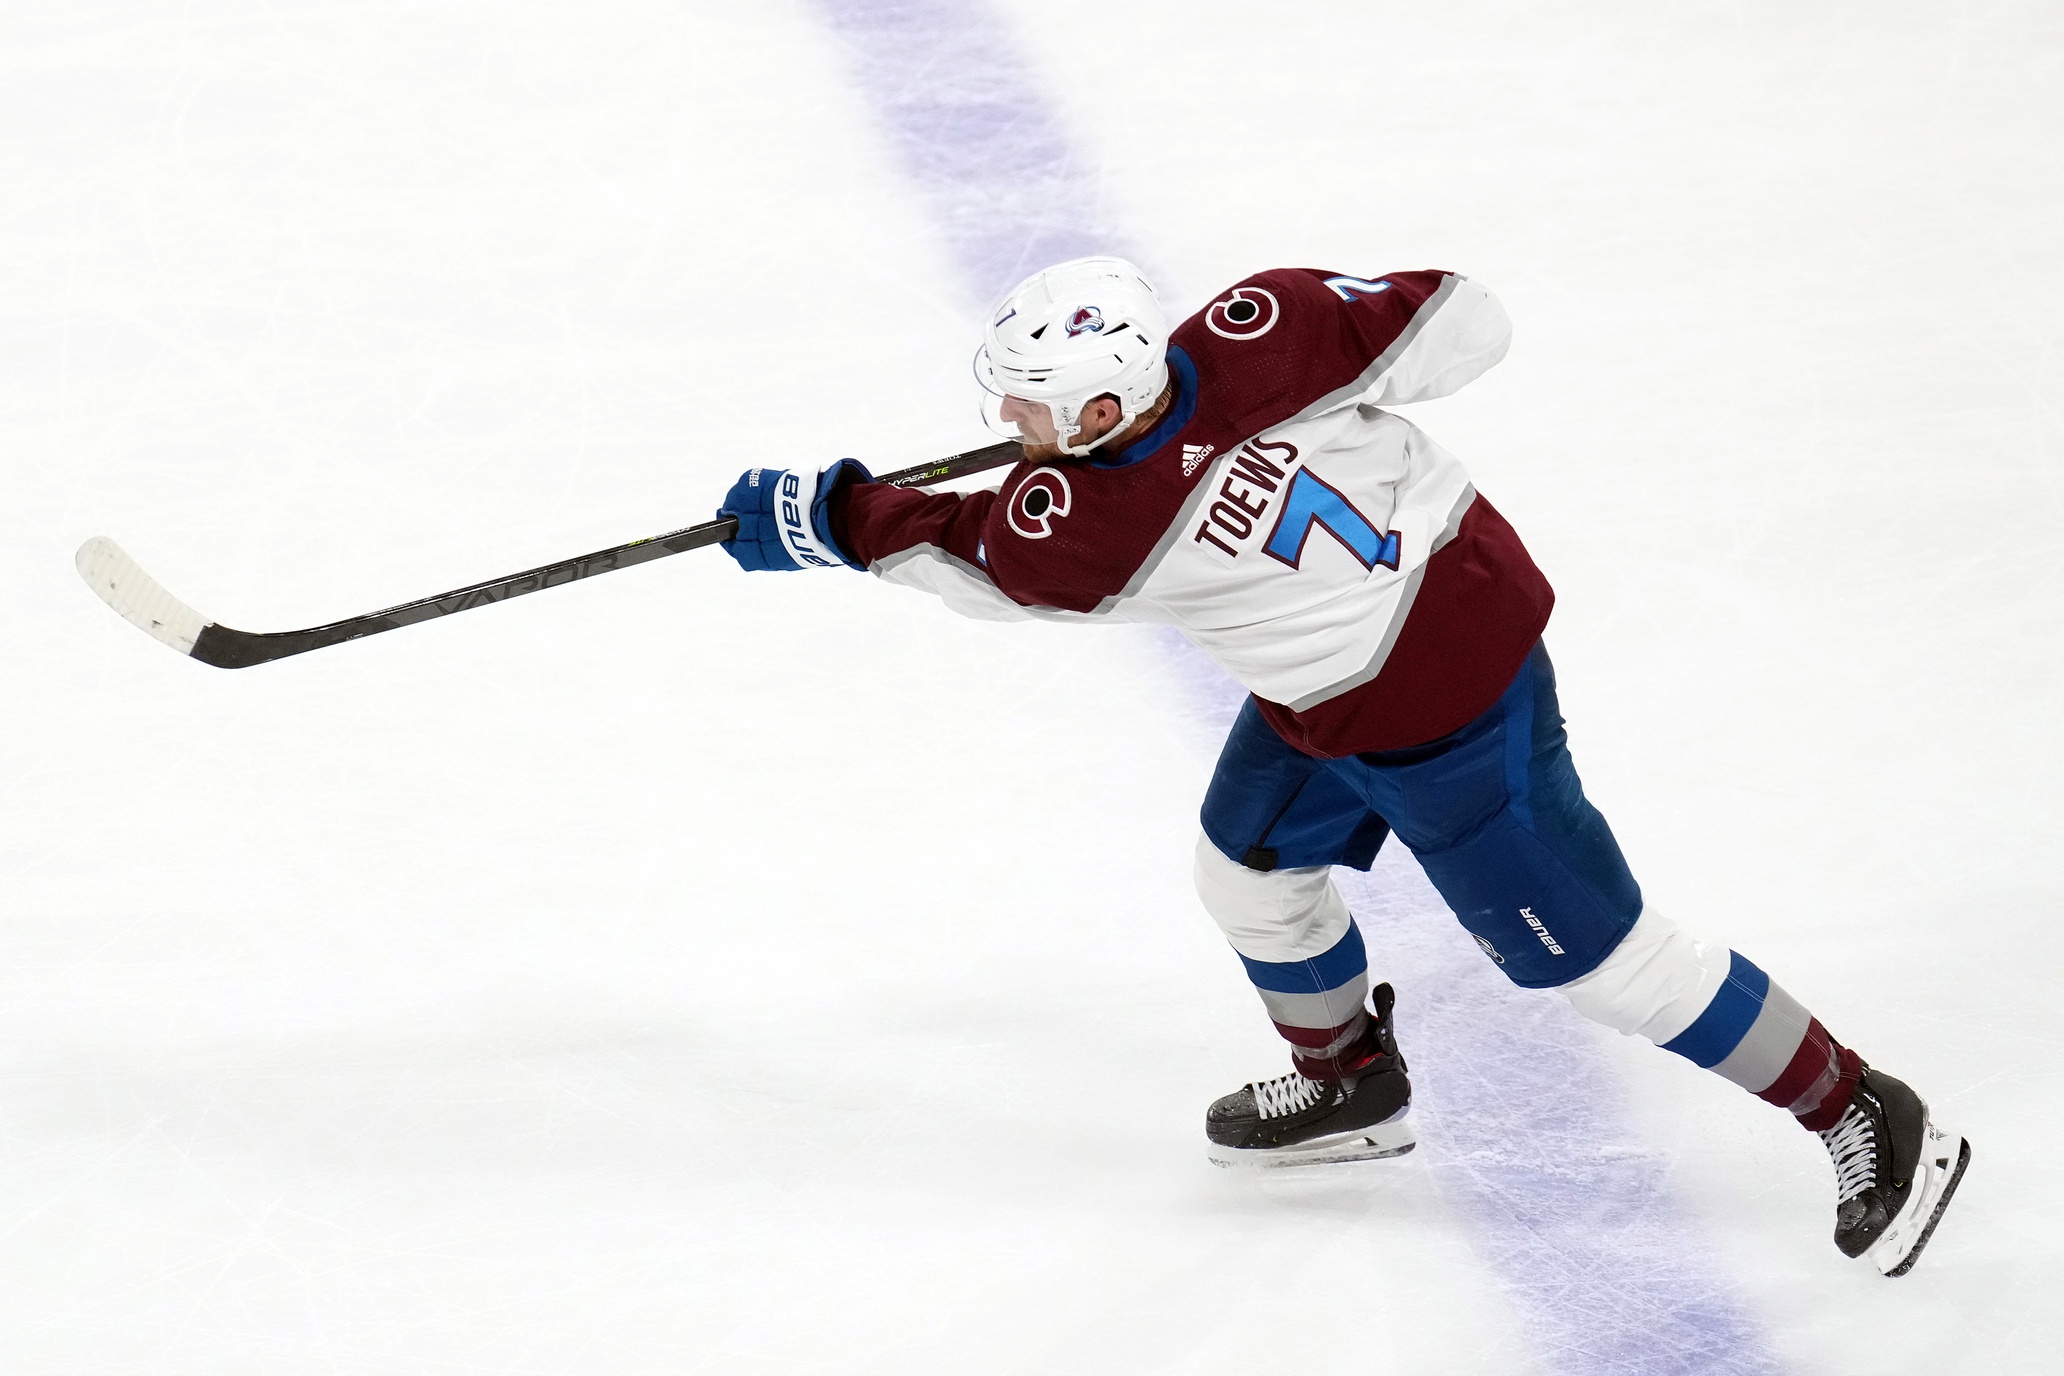 New Jersey Devils at Colorado Avalanche odds, picks and prediction